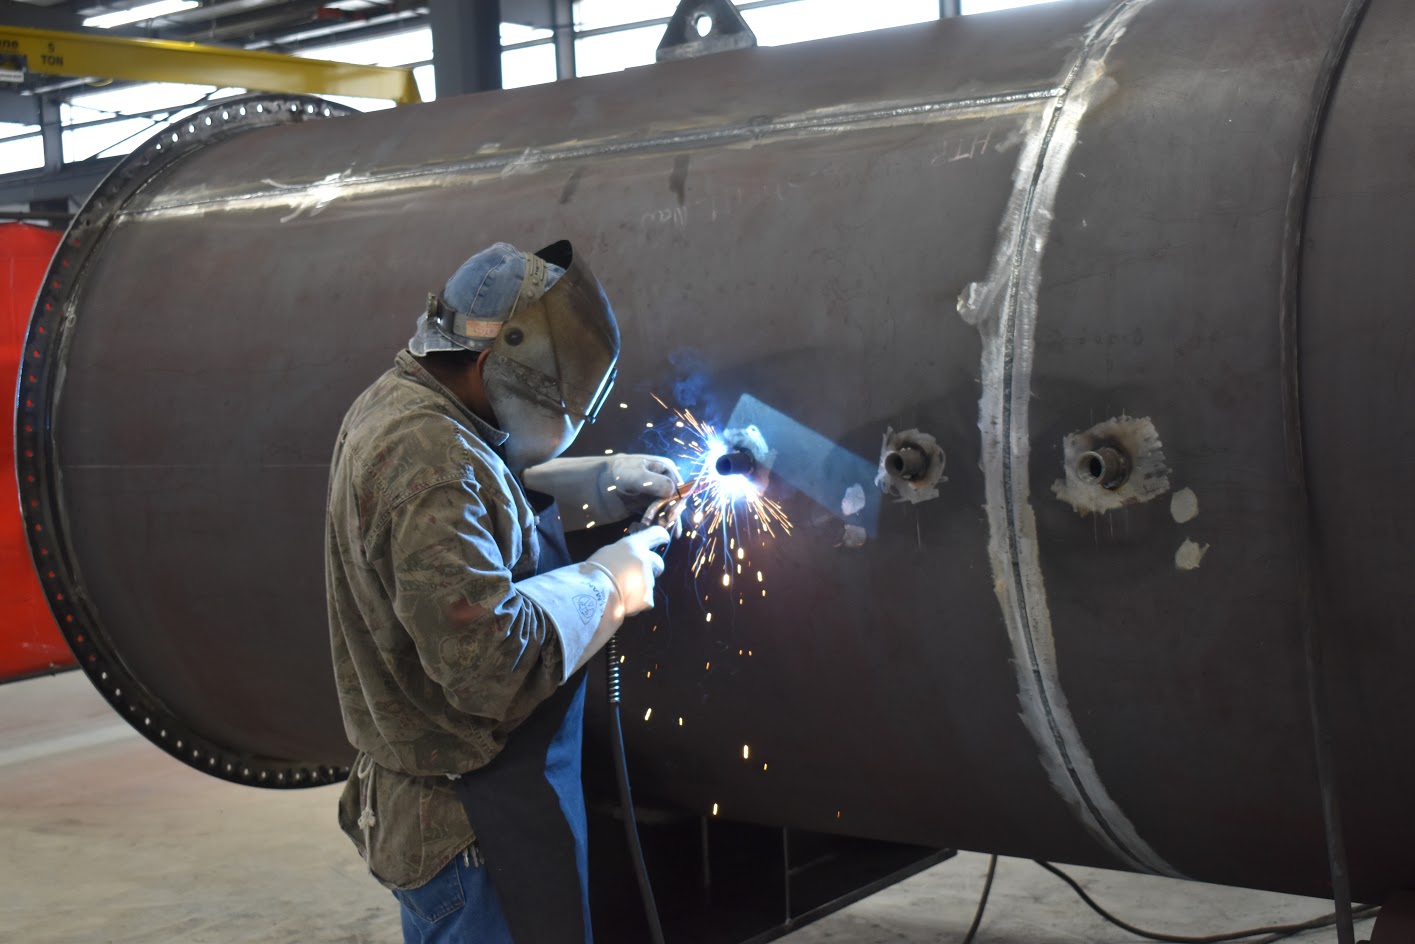 A technician working on a large steel tube